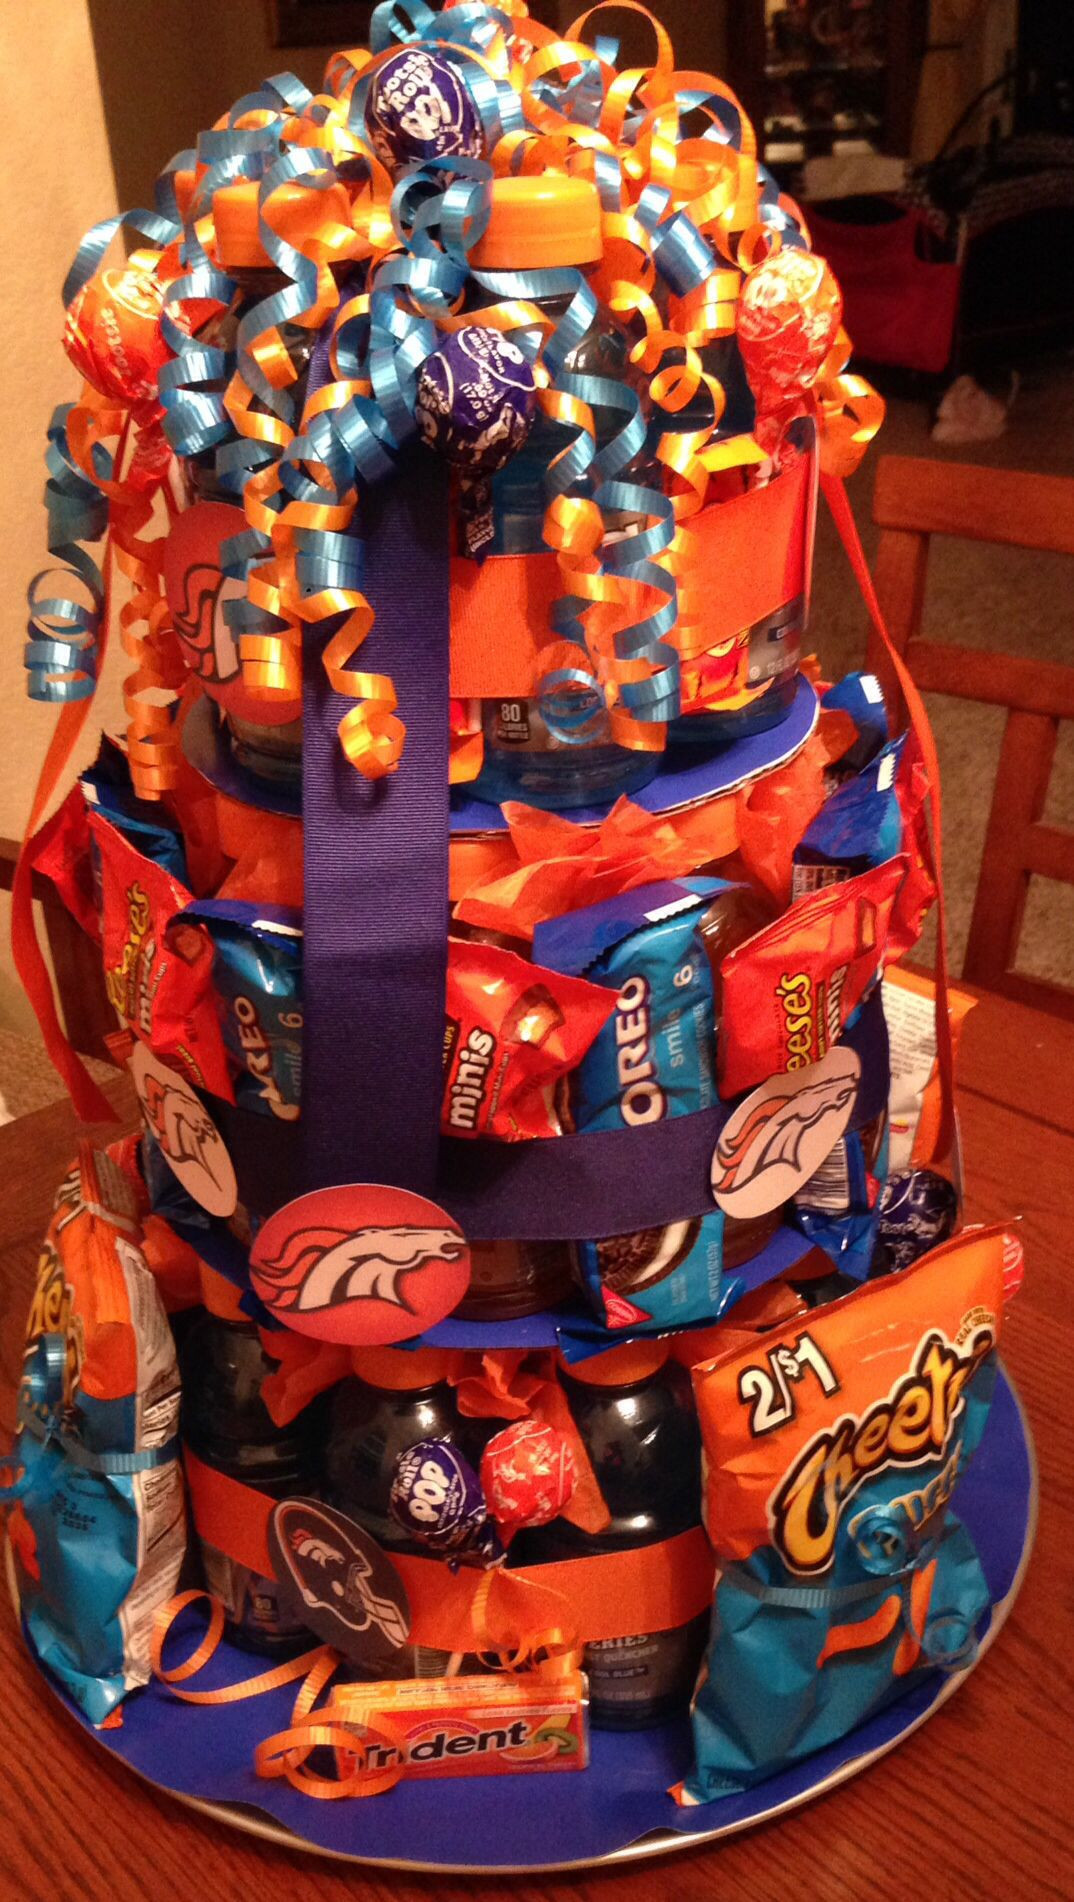 Birthday Party Ideas Denver
 Birthday cake for the Denver Broncos fan in your life